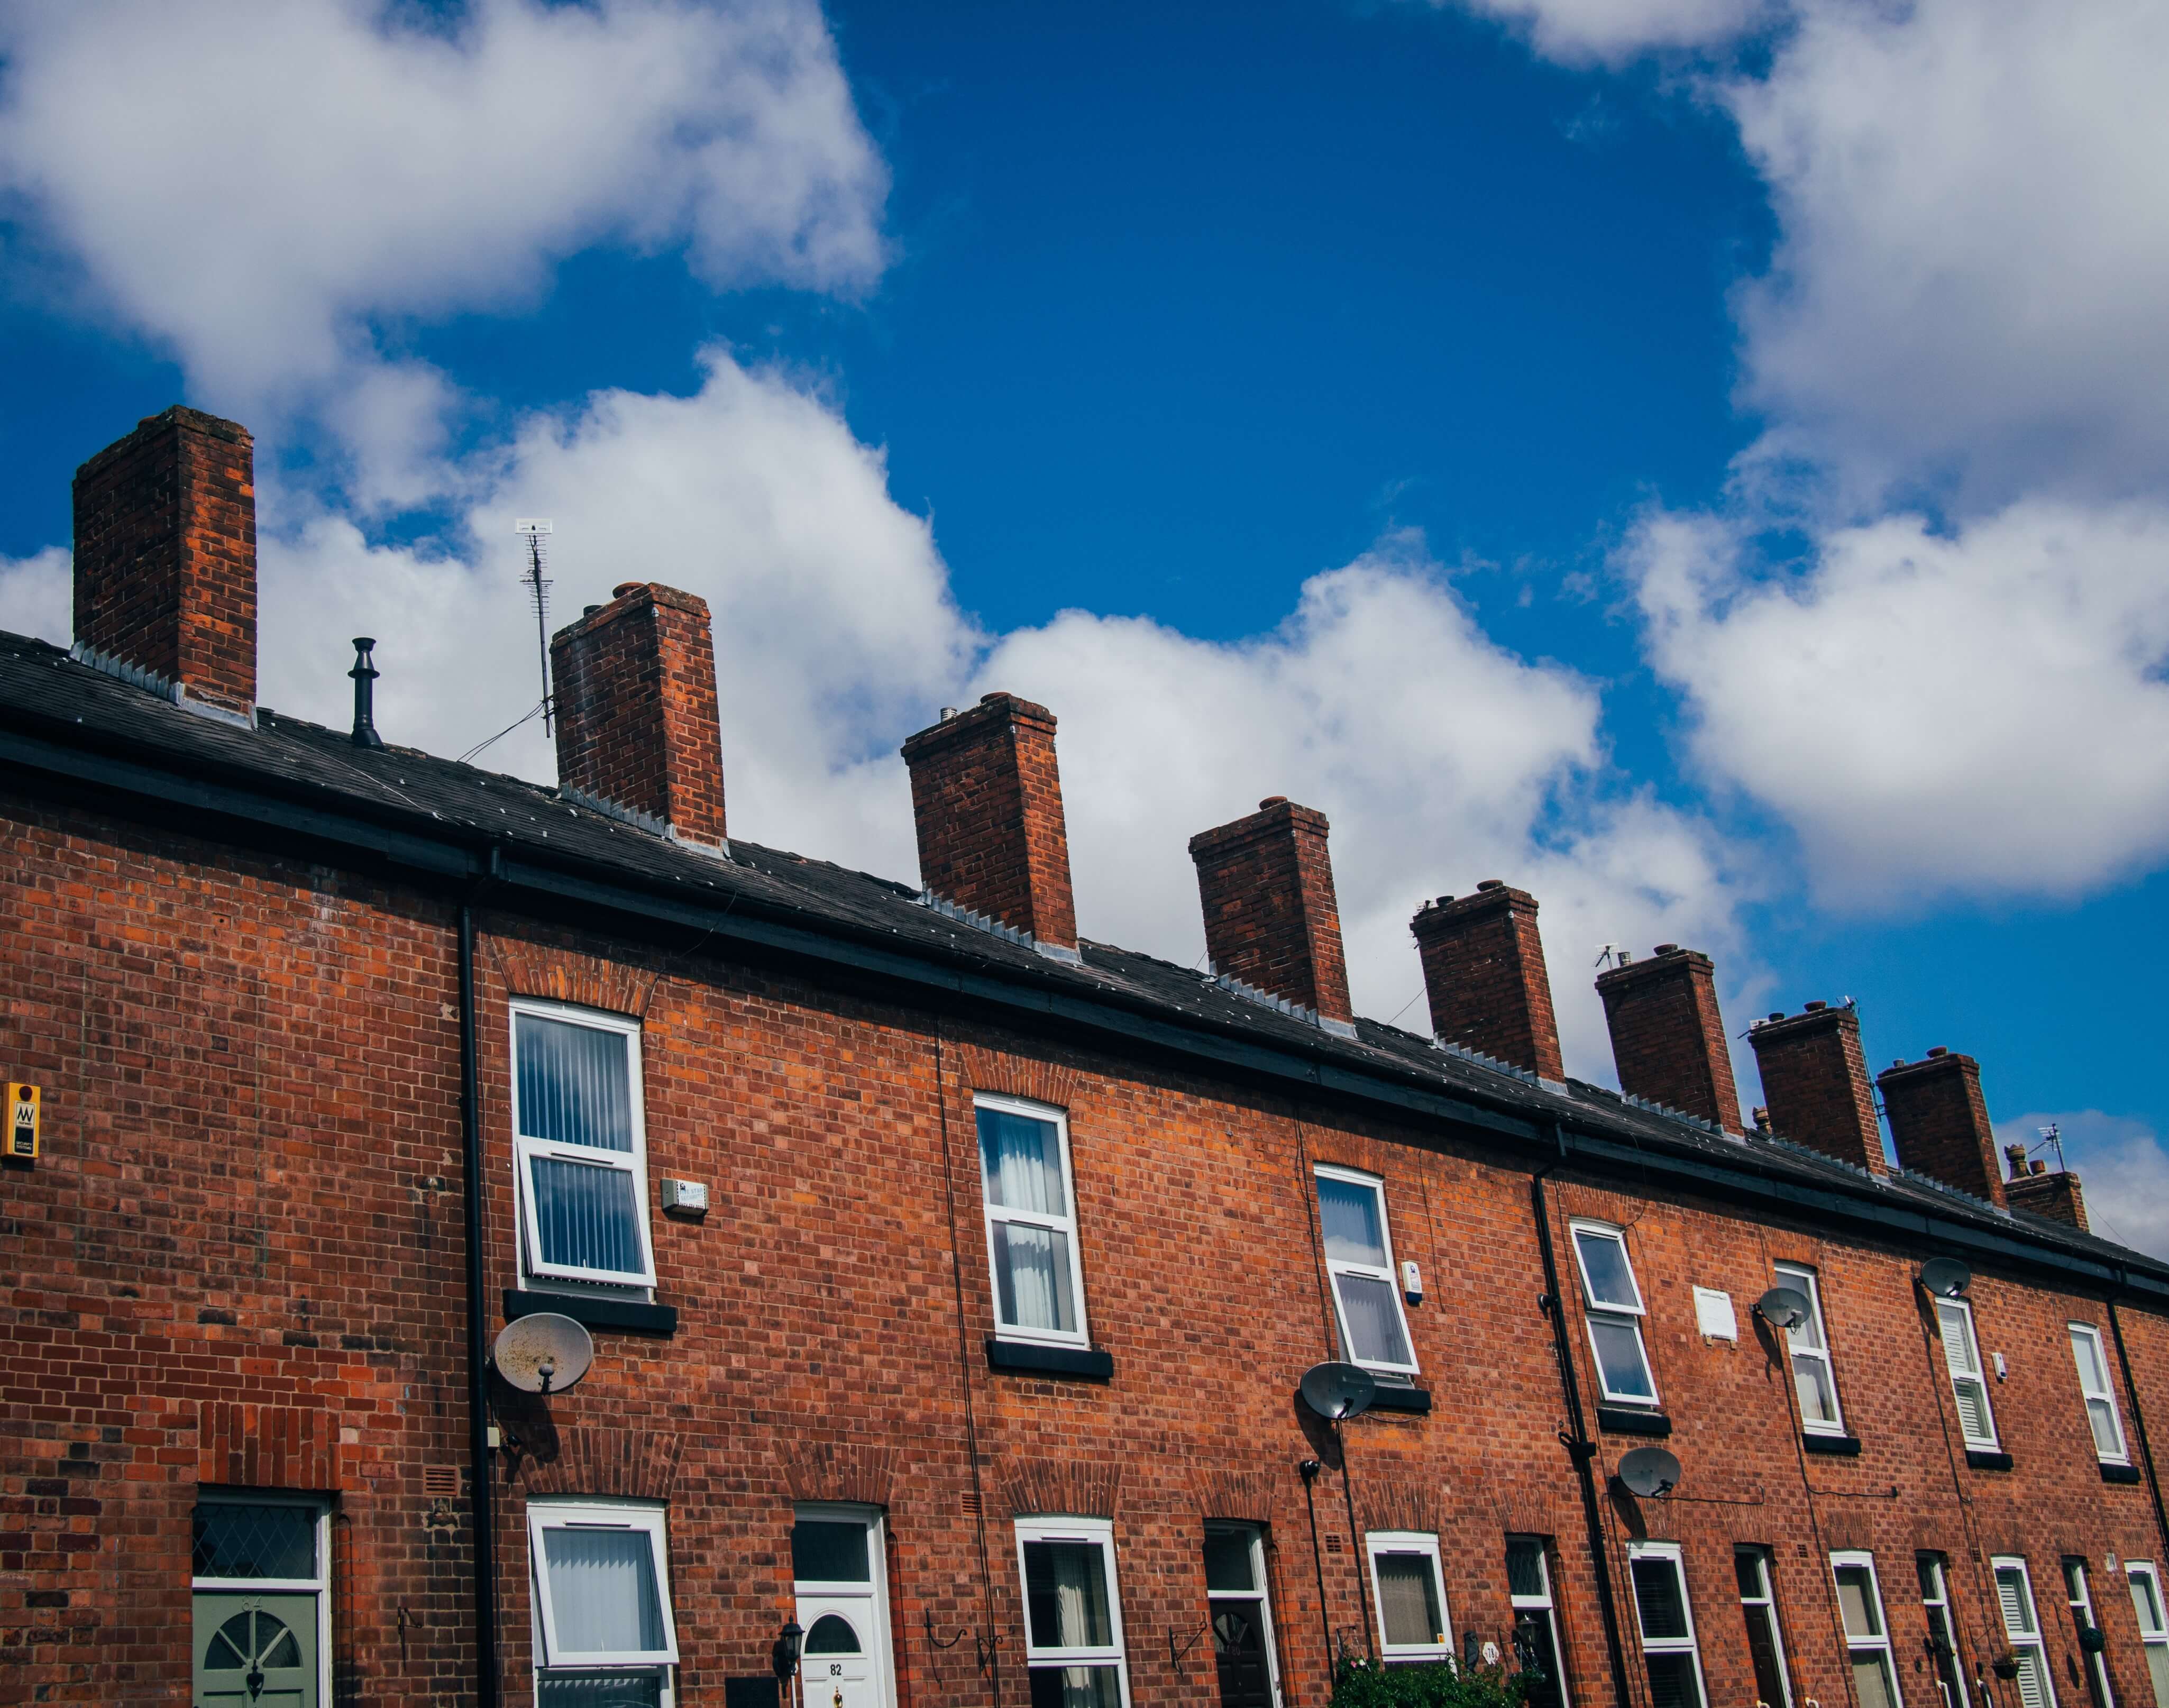 Terraced houses in Dudley pest control services operating in the local area